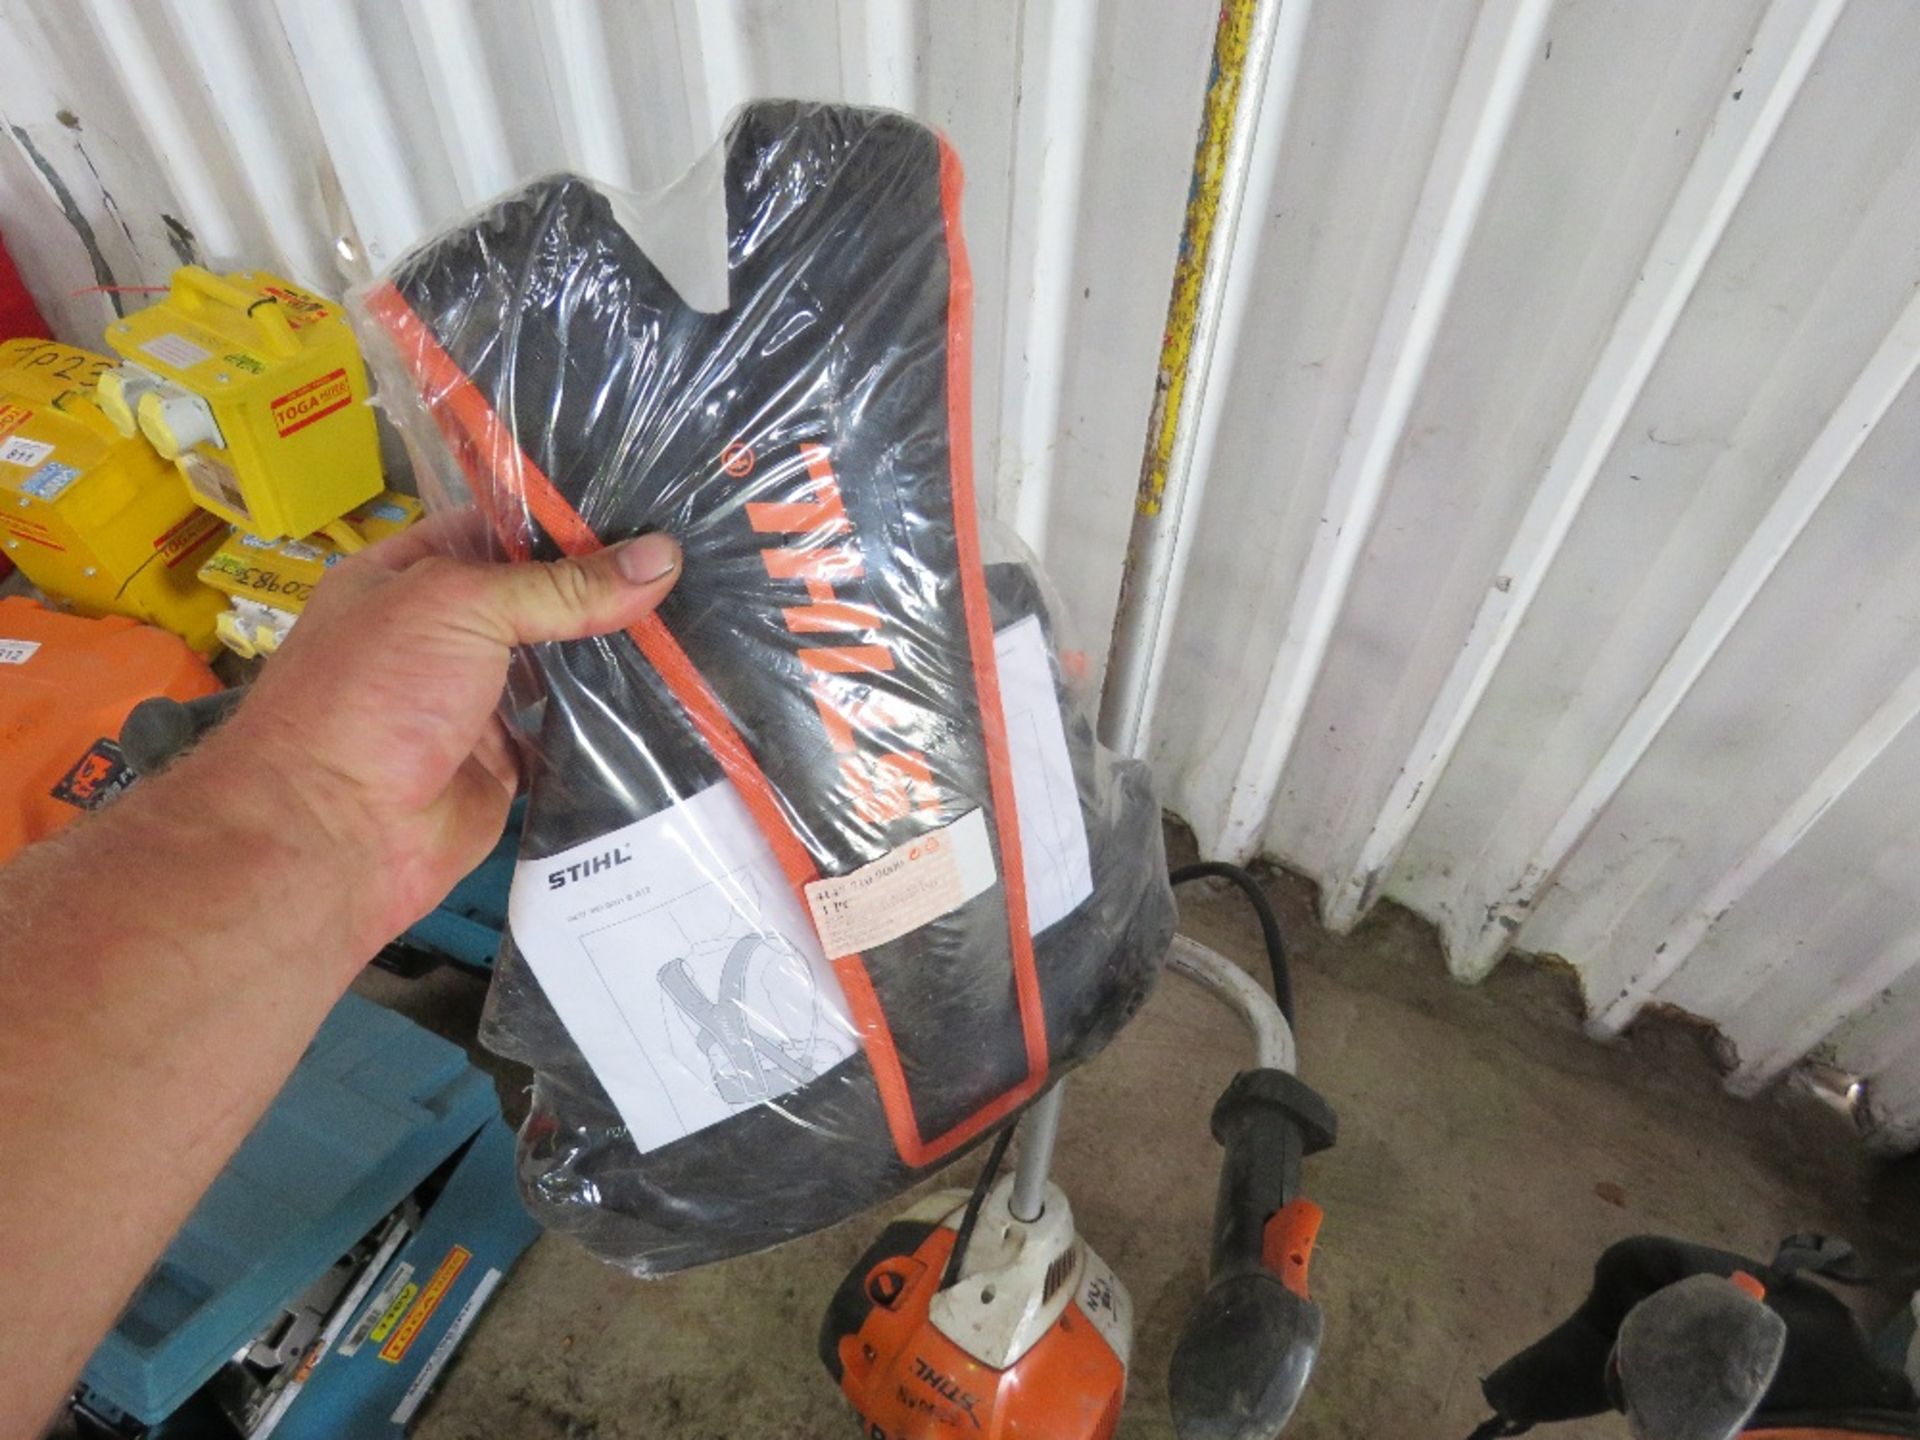 STIHL HEAVY DUTY STRIMMER WITH A NEW HARNESS. DIRECT FROM LOCAL RAIL CONTRACTOR WHO IS CLOSING A DEP - Image 3 of 3